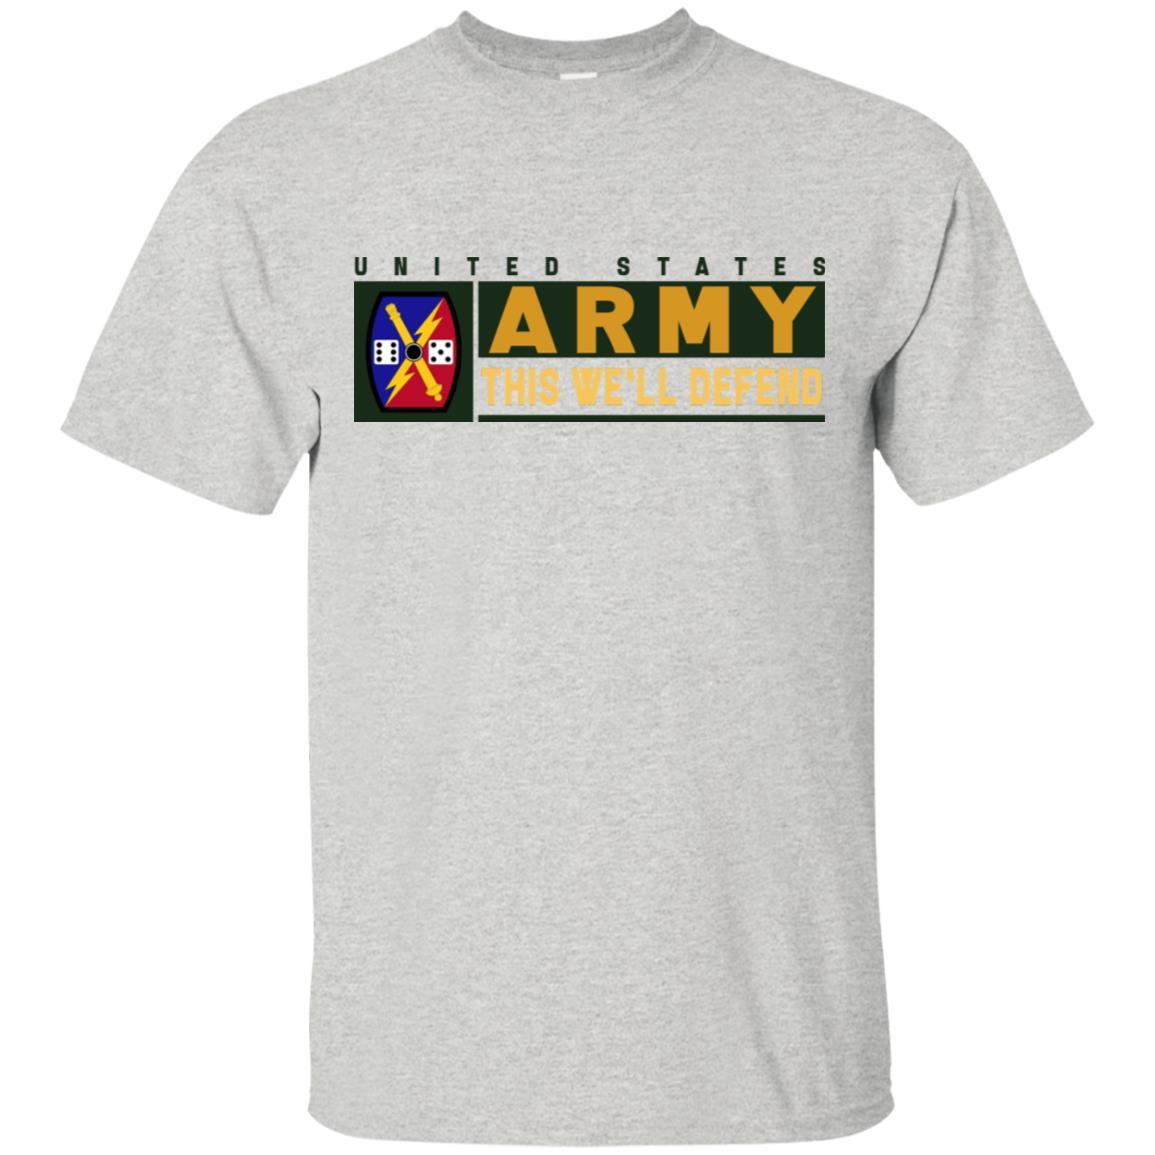 US Army 65 FIRES BRIGADE- This We'll Defend T-Shirt On Front For Men-TShirt-Army-Veterans Nation